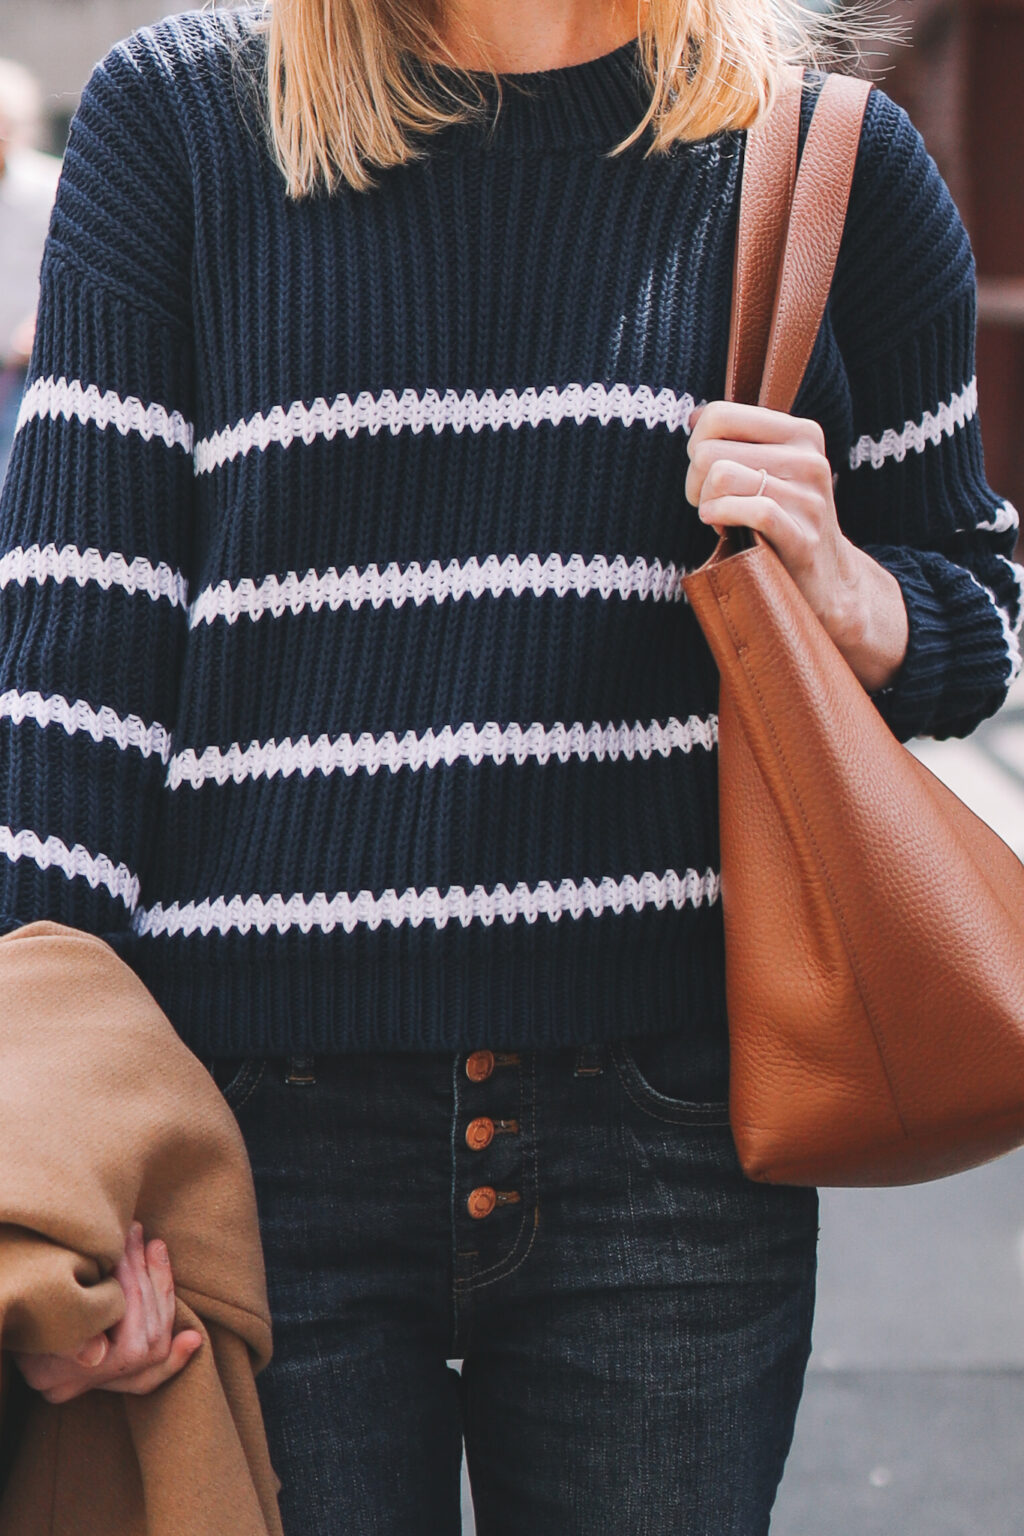 Classic Crewneck Striped Sweater - Kelly in the City